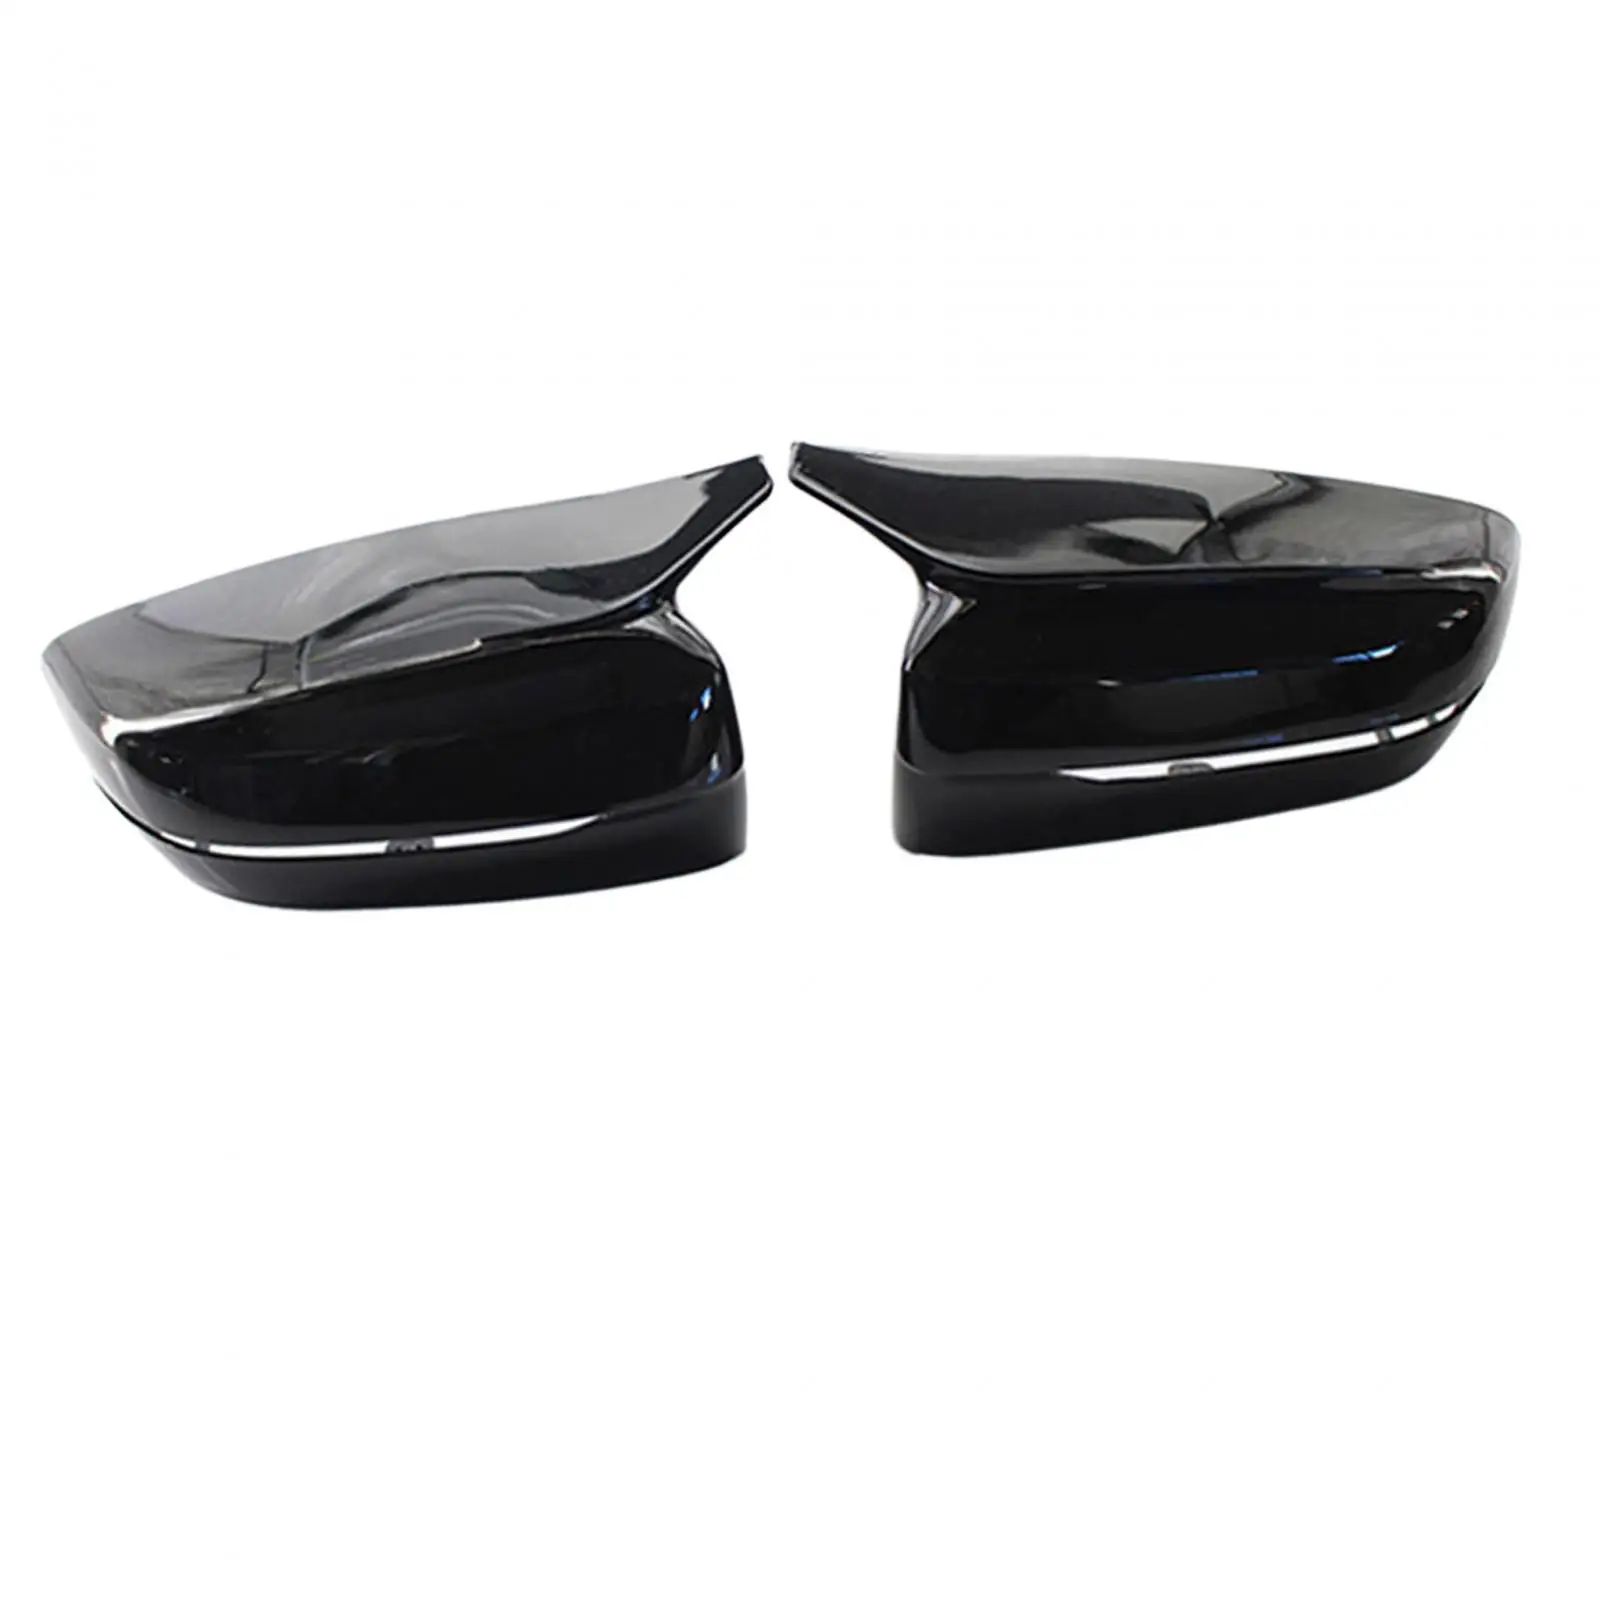 51167422719 Side Mirror Covers Caps Car Accessories Replaces 51167422720 Car Rearview Mirror Cover for G22 G23 4 Series1